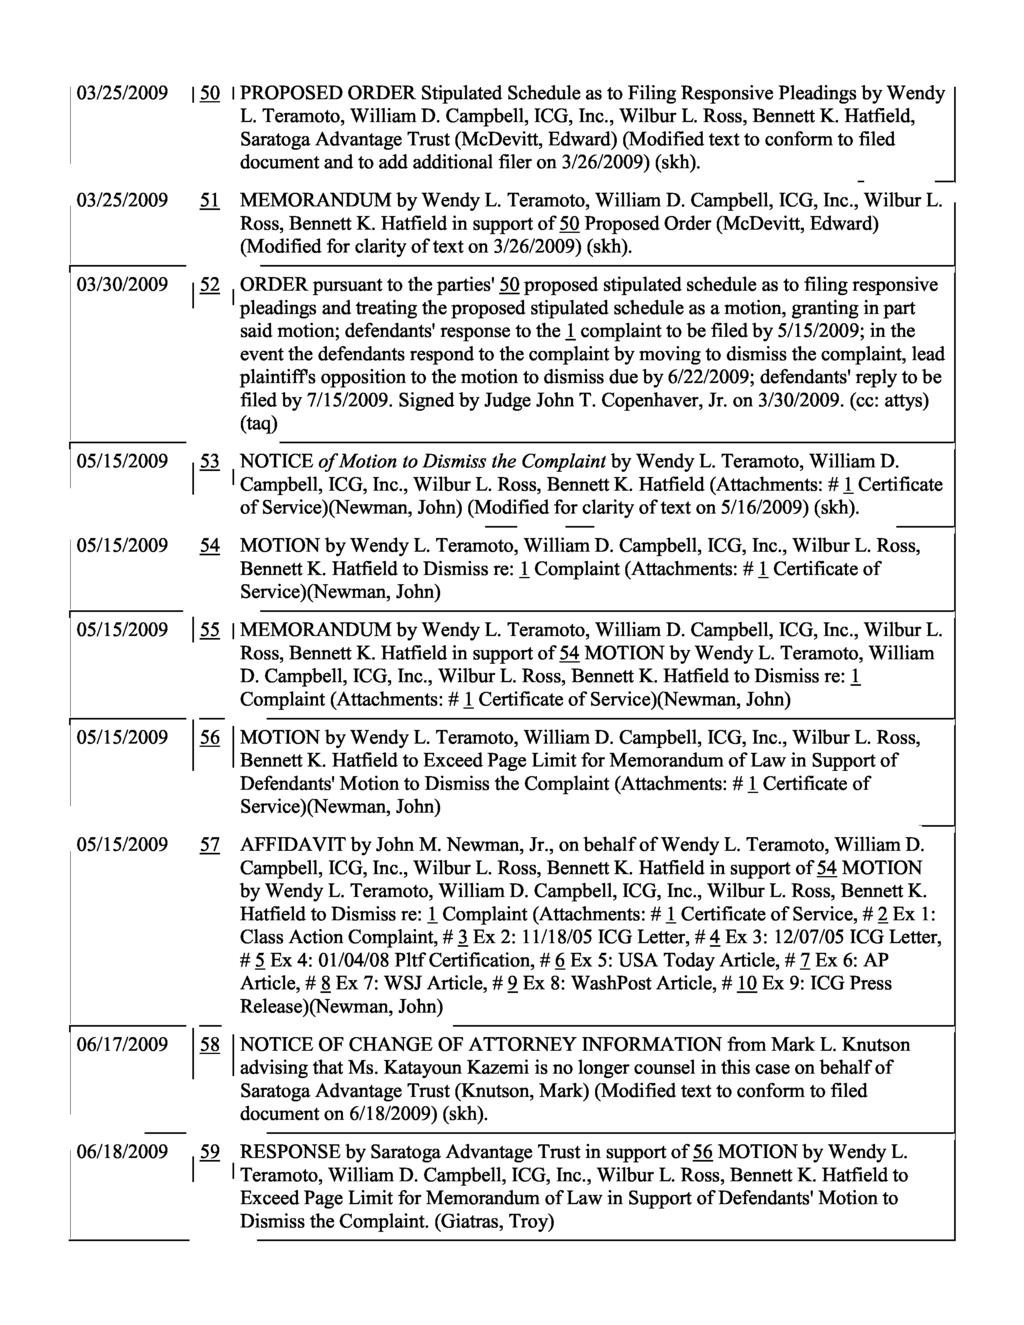 03/25/2009 1 50 1 PROPOSED ORDER Stipulated Schedule as to Filing Responsive Pleadings by Wendy L. Teramoto, William D. Campbell, ICG, Inc., Wilbur L. Ross, Bennett K.